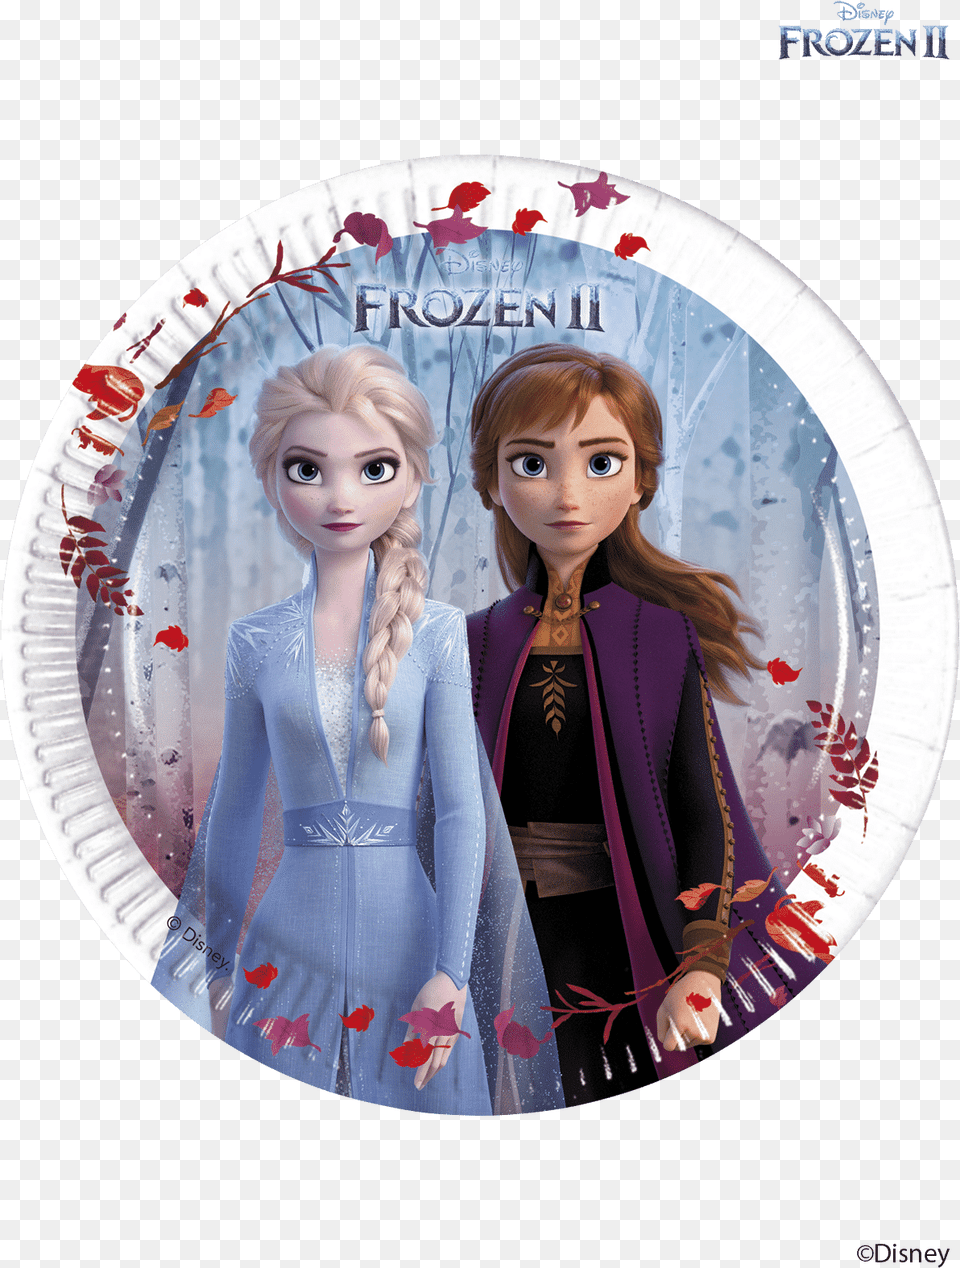 Home Furniture Amp Diy Disney Frozen Pink Princess Anna Frozen 2 Party Plate, Doll, Toy, Clothing, Dress Free Png Download